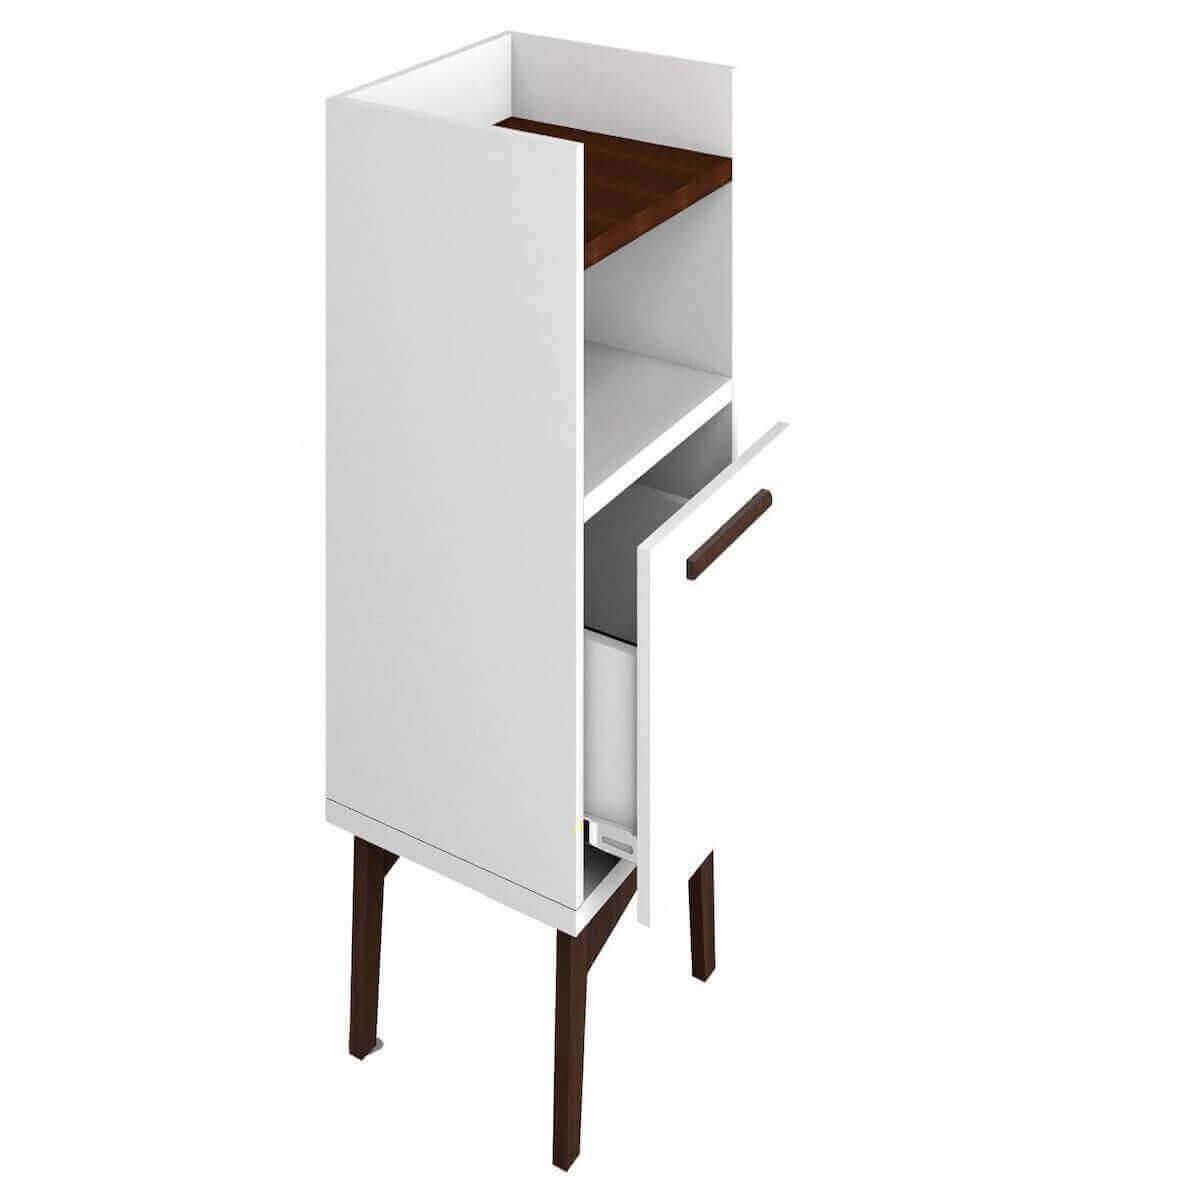 Manhattan Comfort Mid-Century Modern Brookdale Nightstand with 1 Shelf in White and Nut Brown 141AMC209 Open Drawer